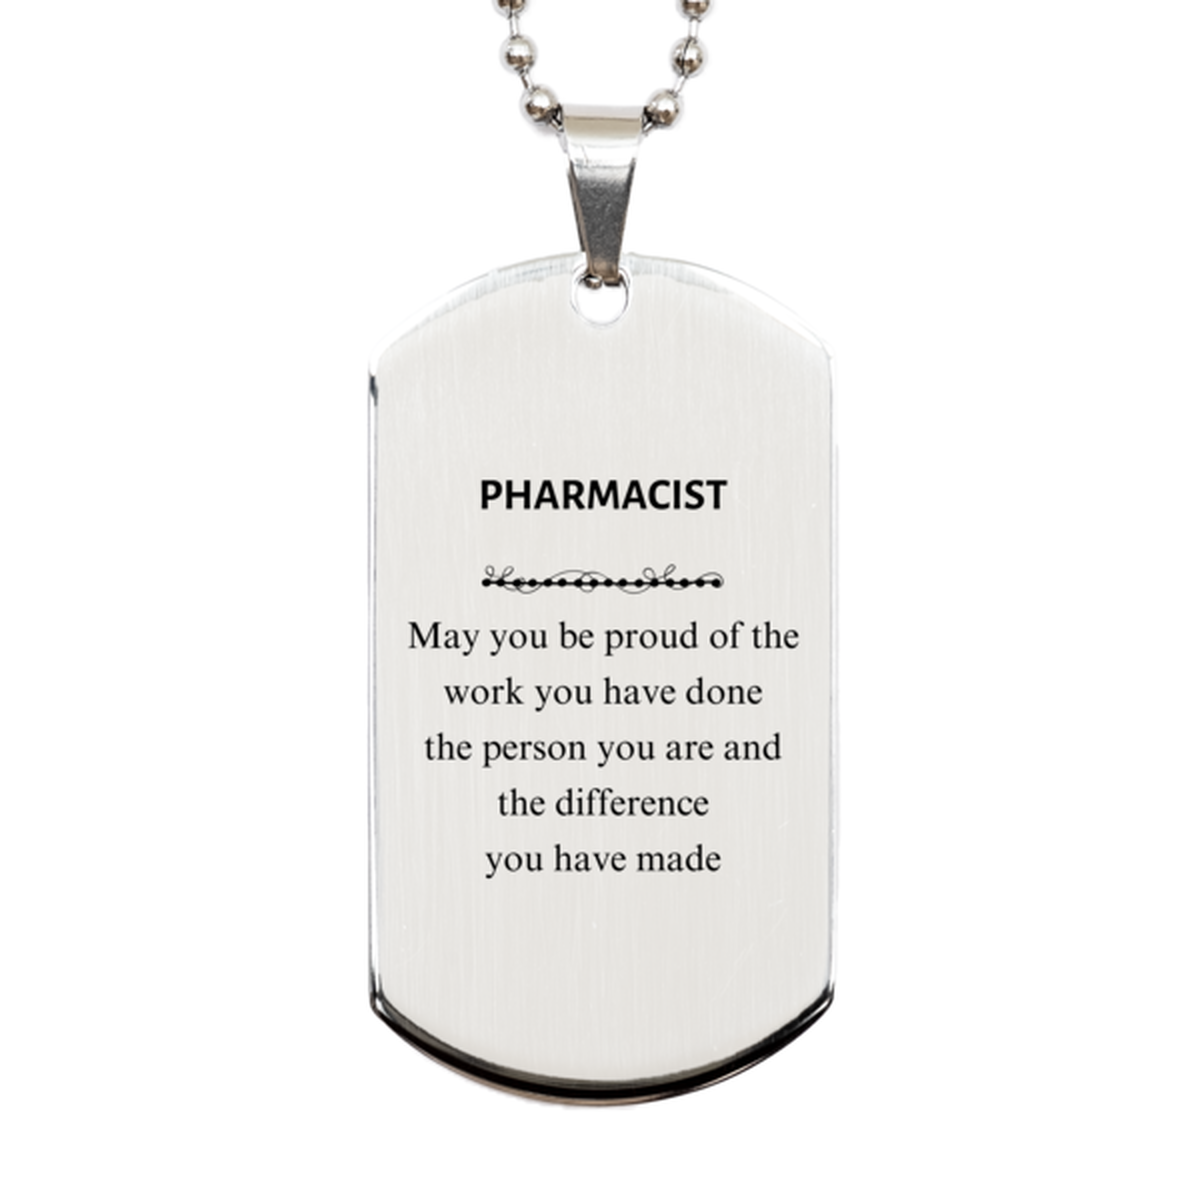 Pharmacist May you be proud of the work you have done, Retirement Pharmacist Silver Dog Tag for Colleague Appreciation Gifts Amazing for Pharmacist